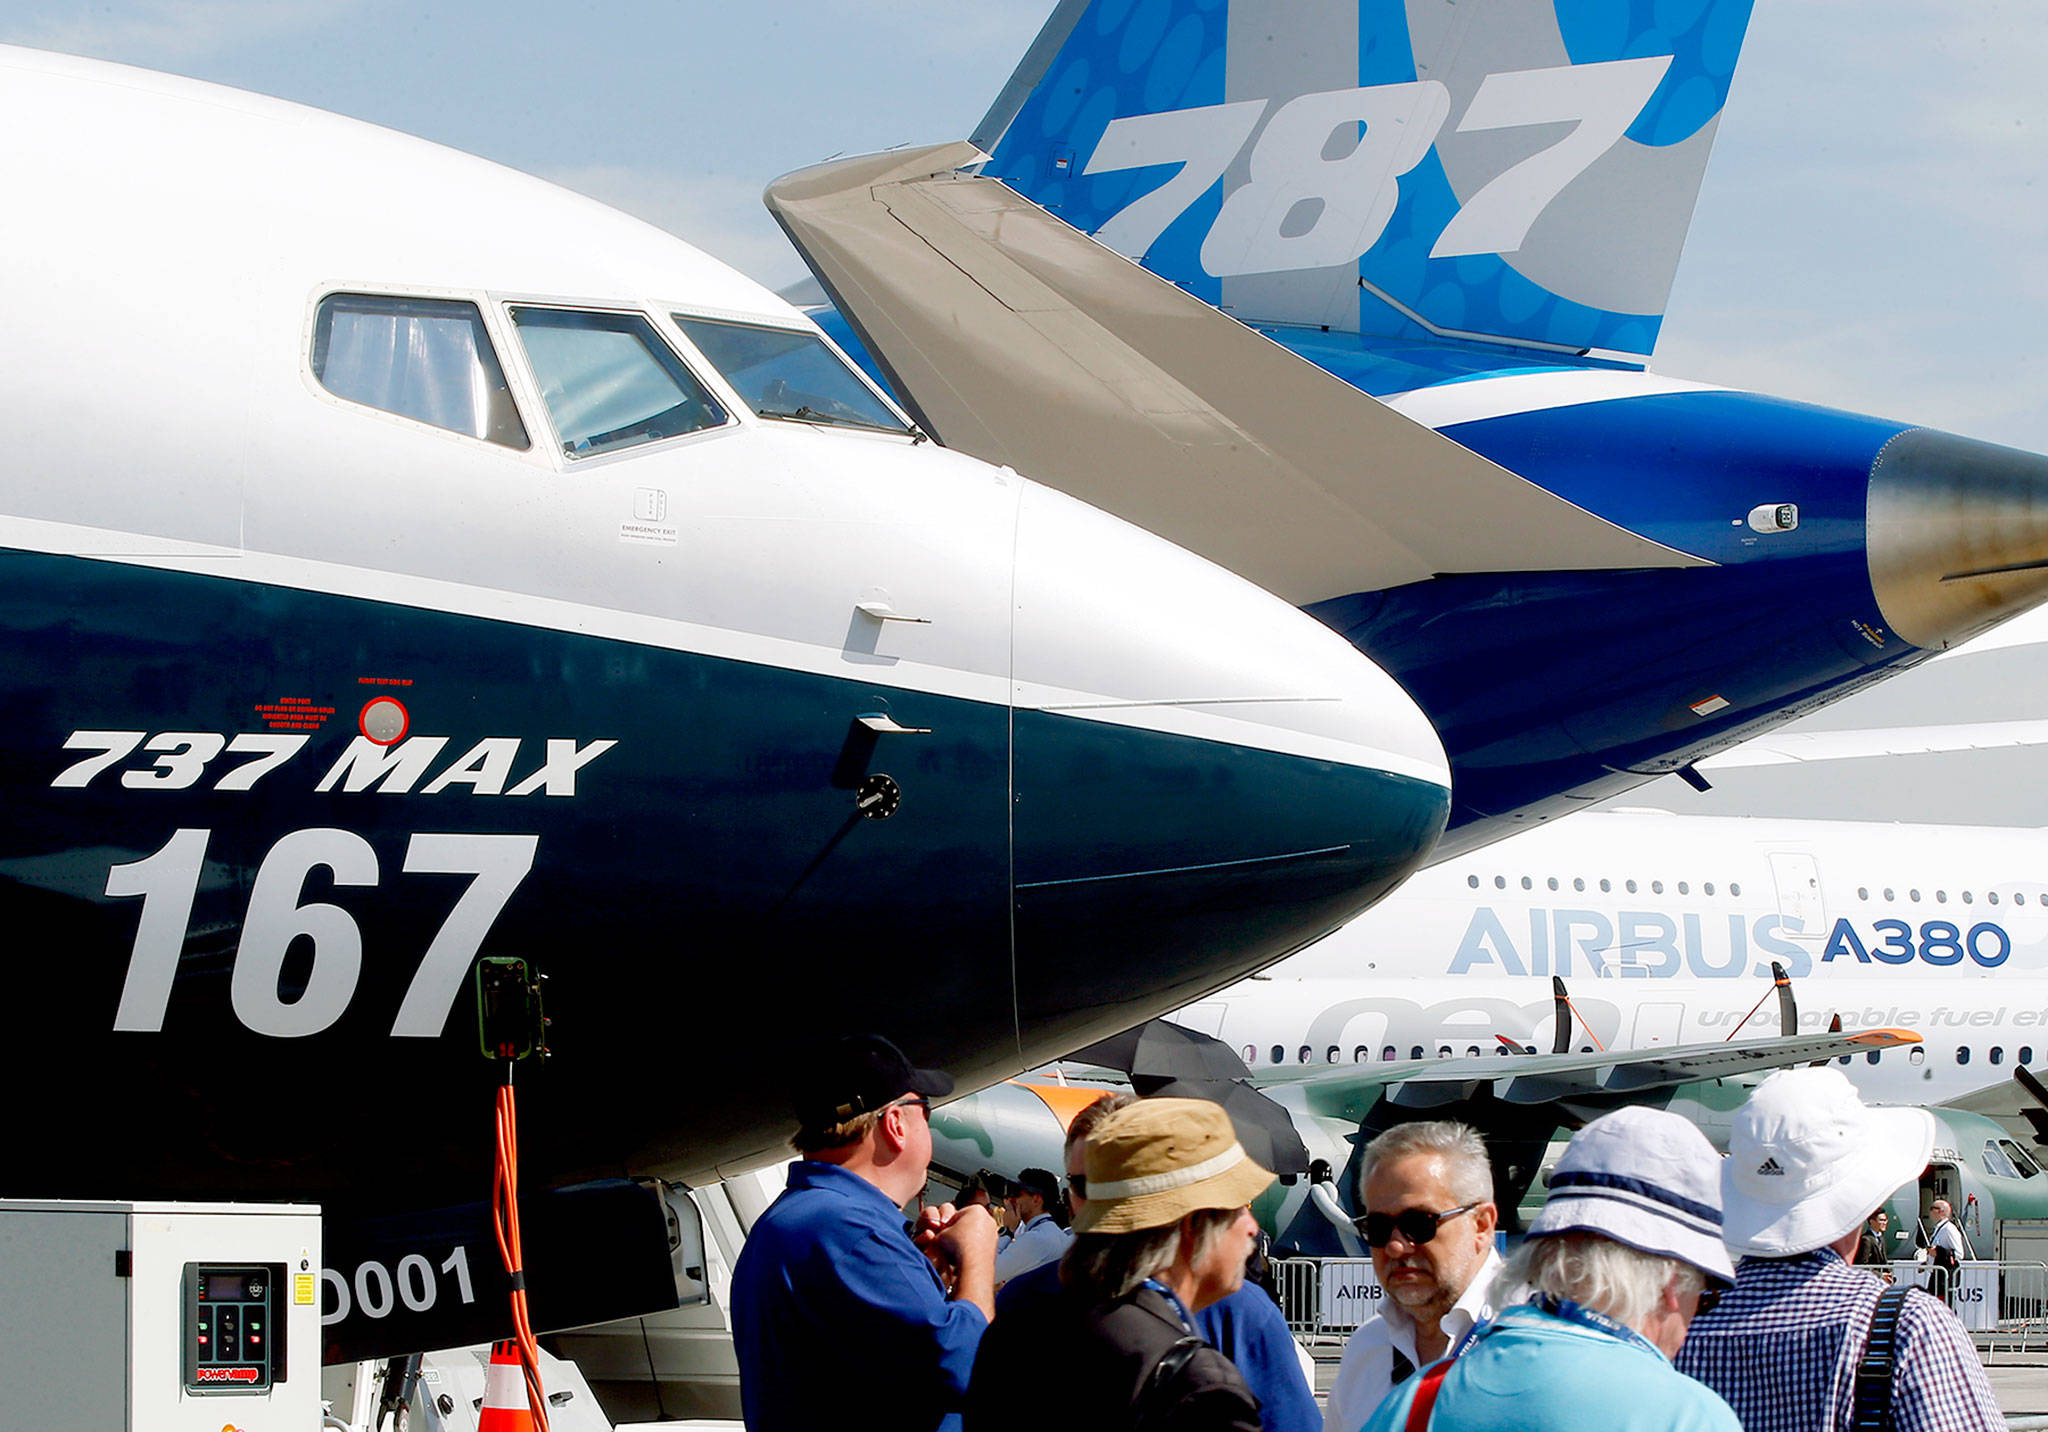 A Boeing 737 Max, a 787 Dreamliner and an Airbus A380 on display at the Paris Air Show in Le Bourget, France, in 2017. (AP Photo/Michel Euler)